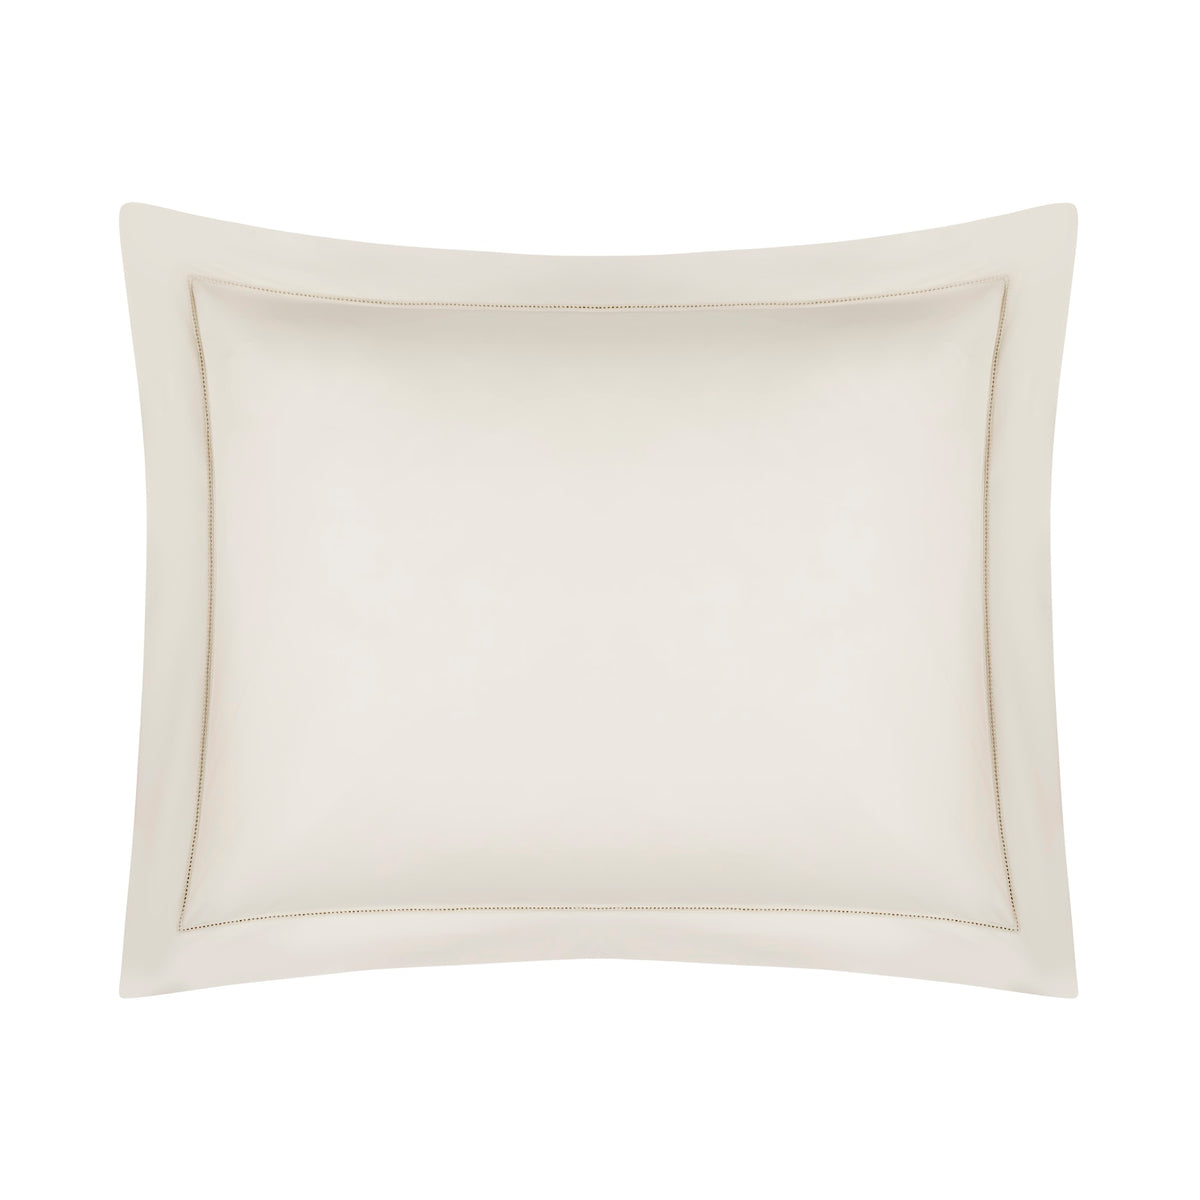 Sham of Home Treasures Perla Percale Bedding in Oyster Color